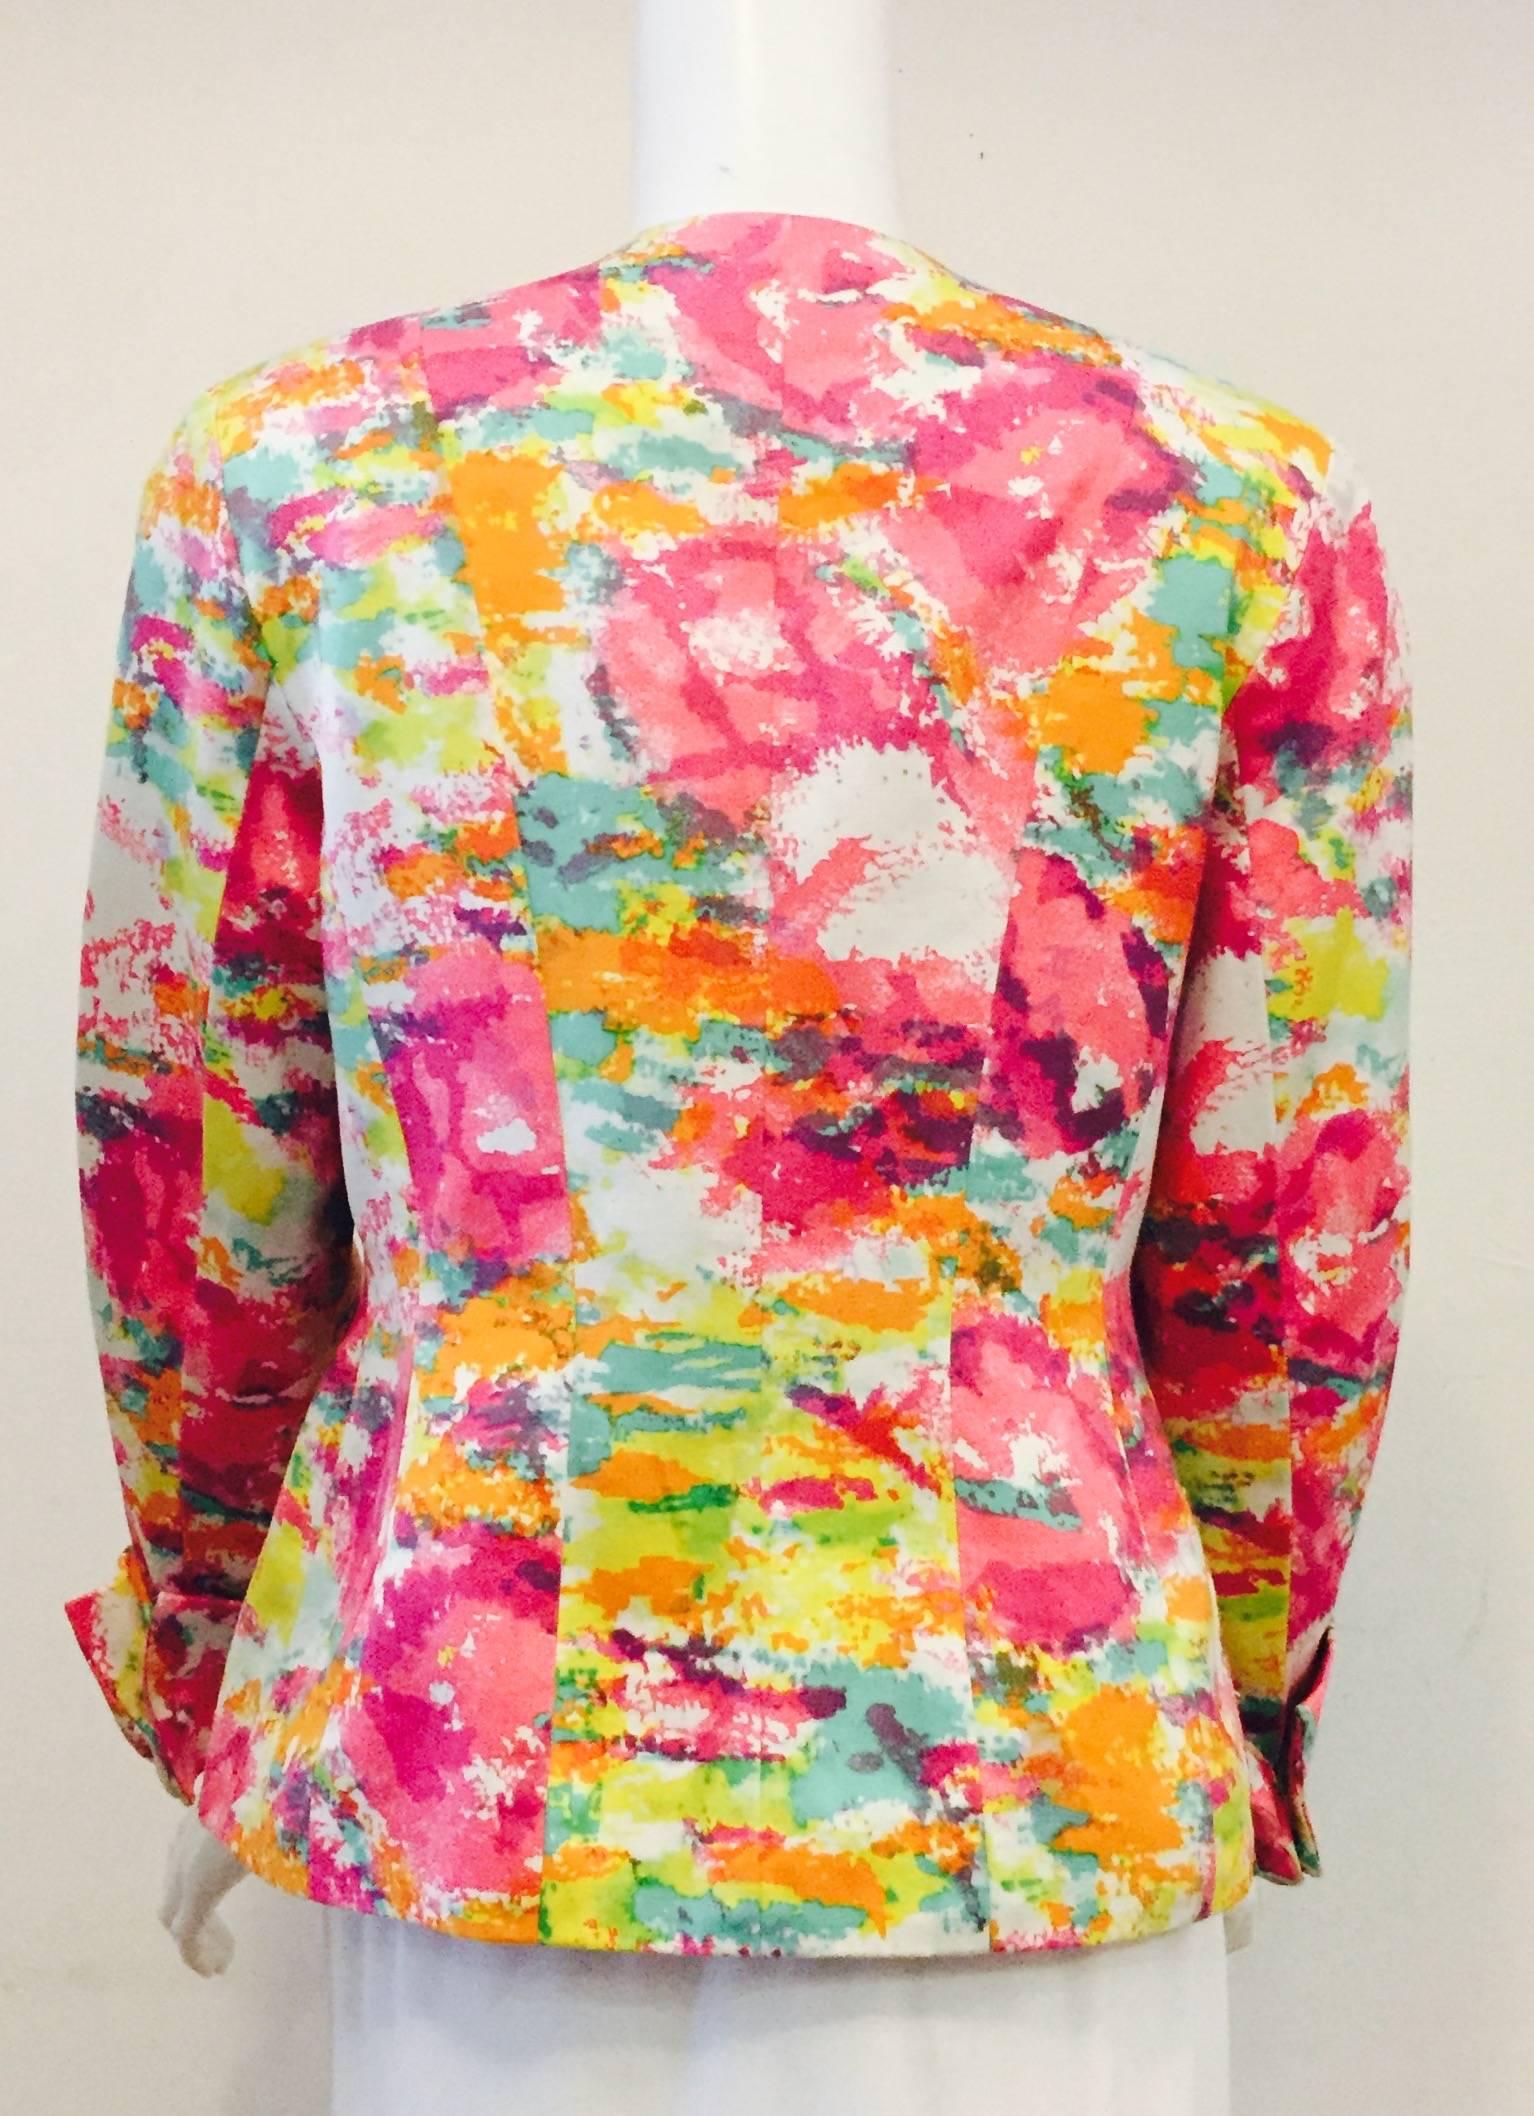 Beige Celebrated Chanel Multi Color Flower Print Jacket with 2 Front Pockets